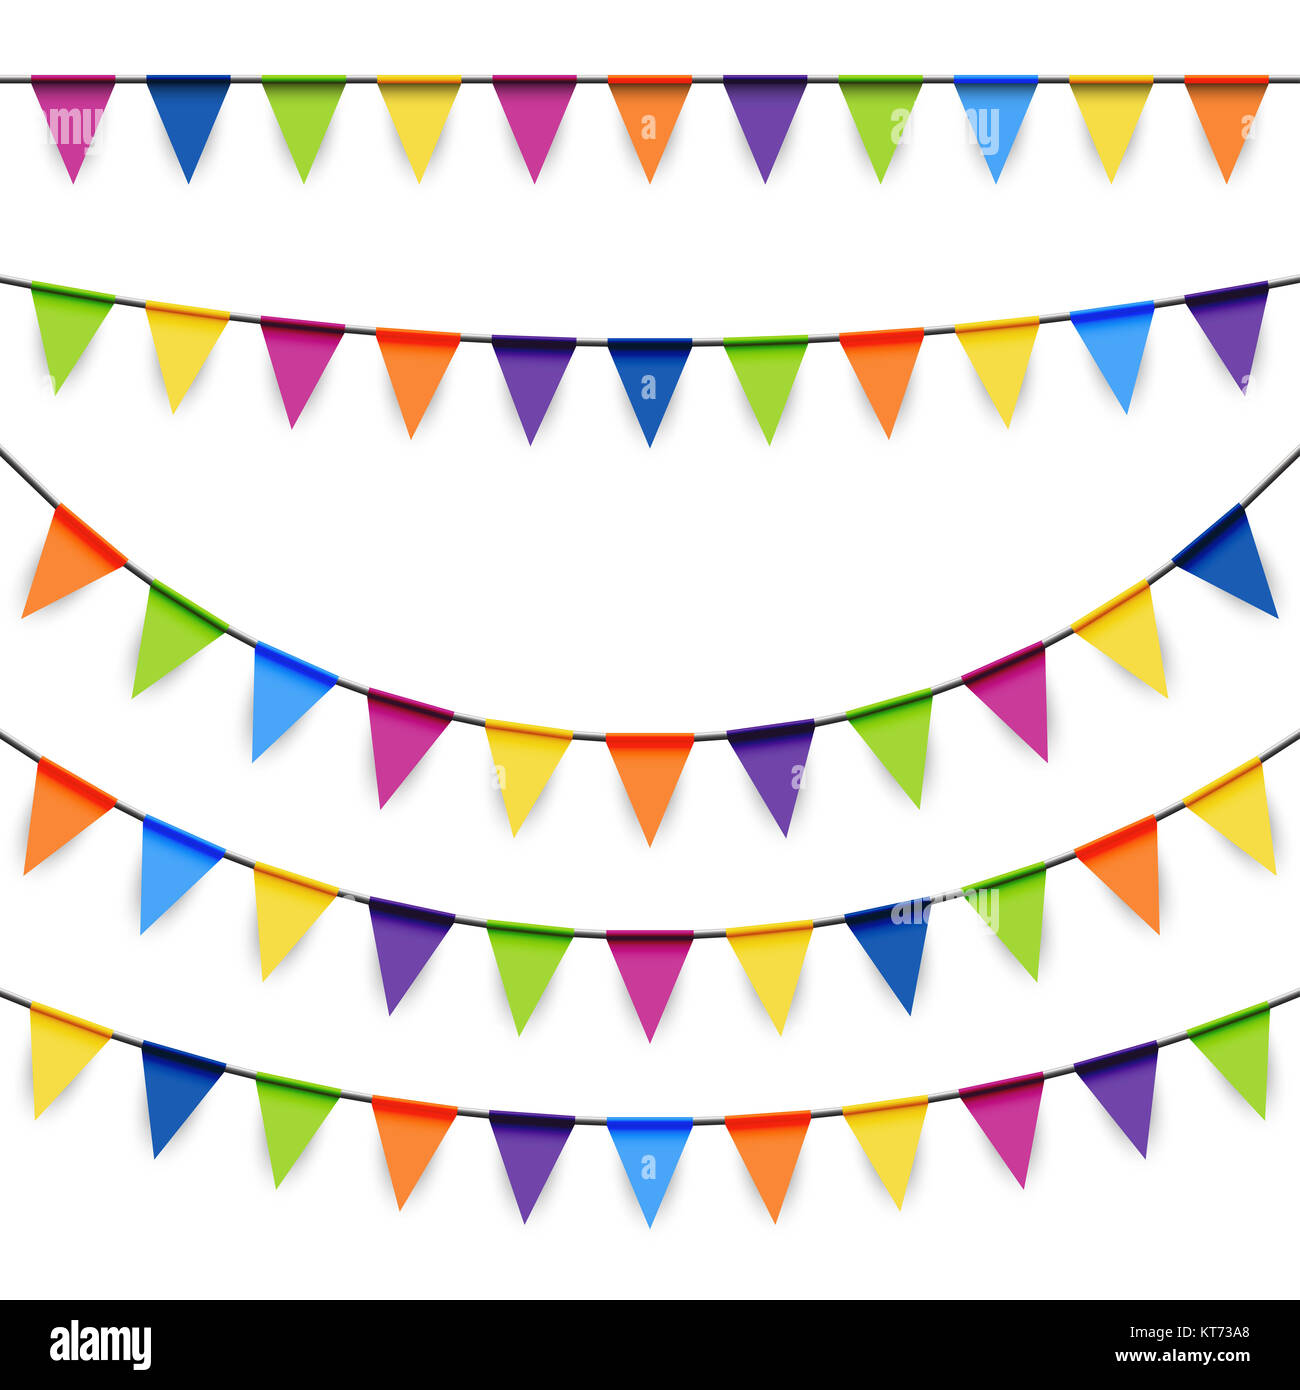 colored garlands background collection for party or festival usage Stock Photo